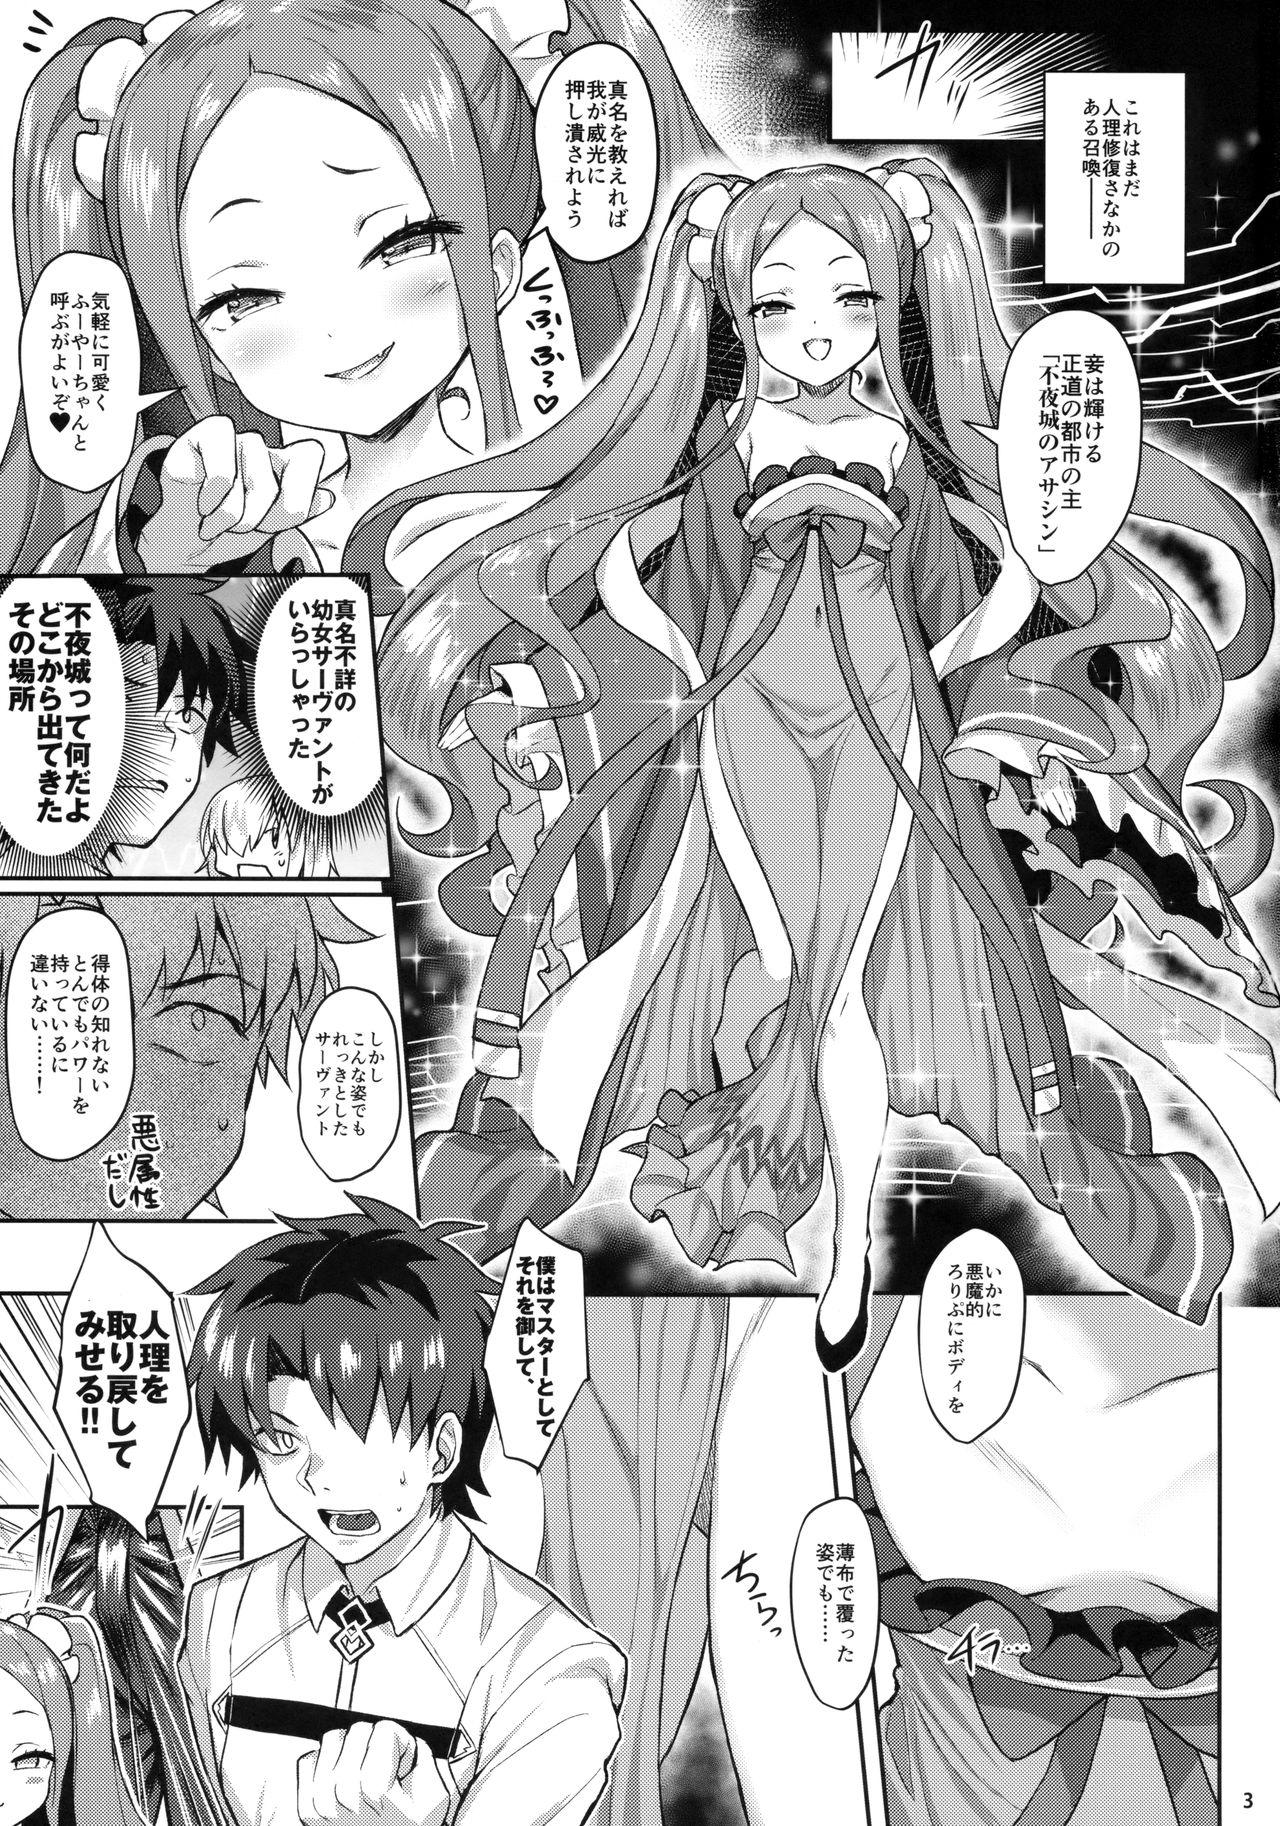 Reverse Fuya Syndrome - Sleepless Syndrome - Fate grand order Gay Dudes - Page 2